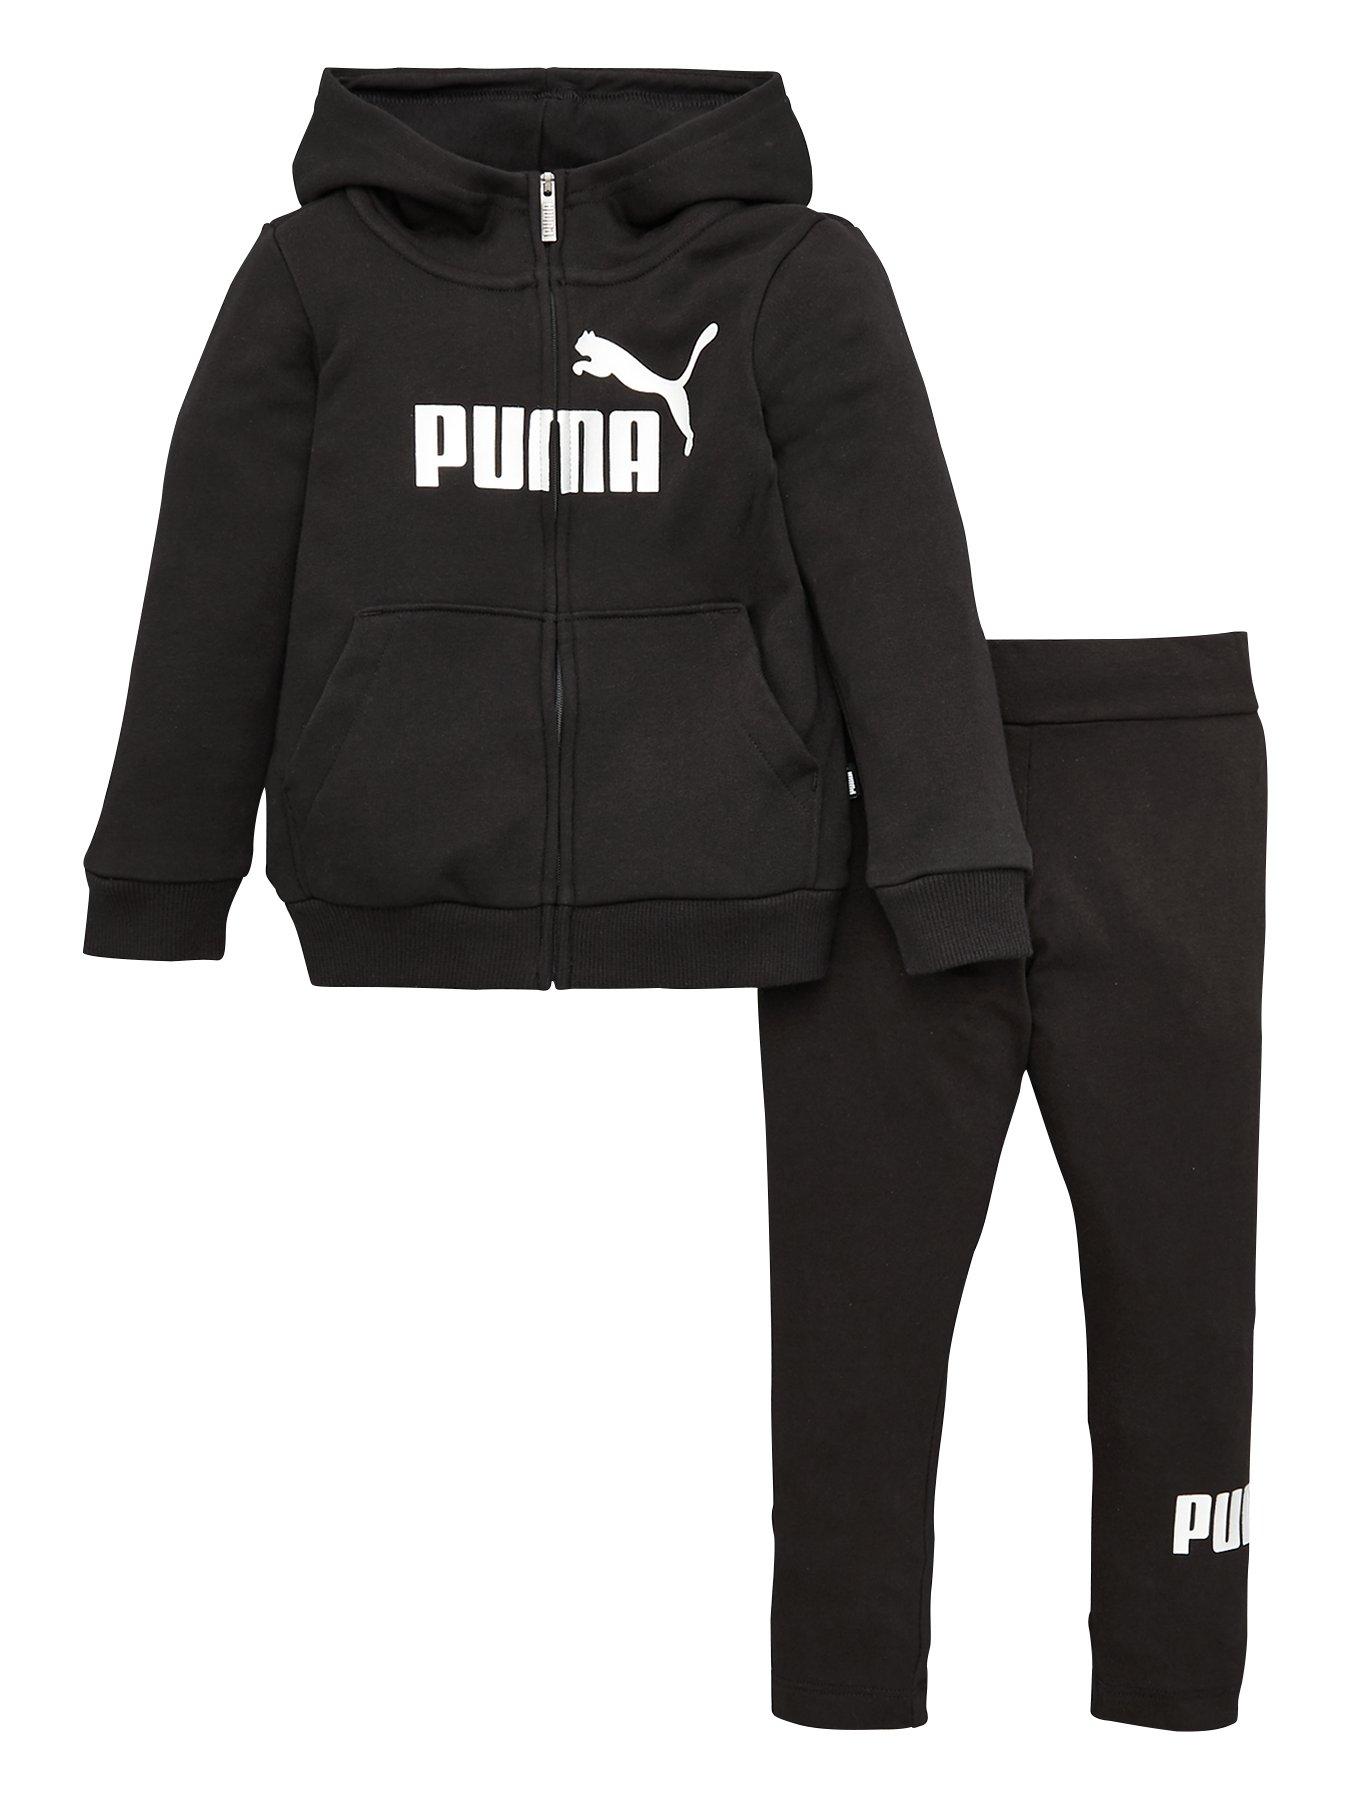 5/6 years | Puma | Girls clothes 